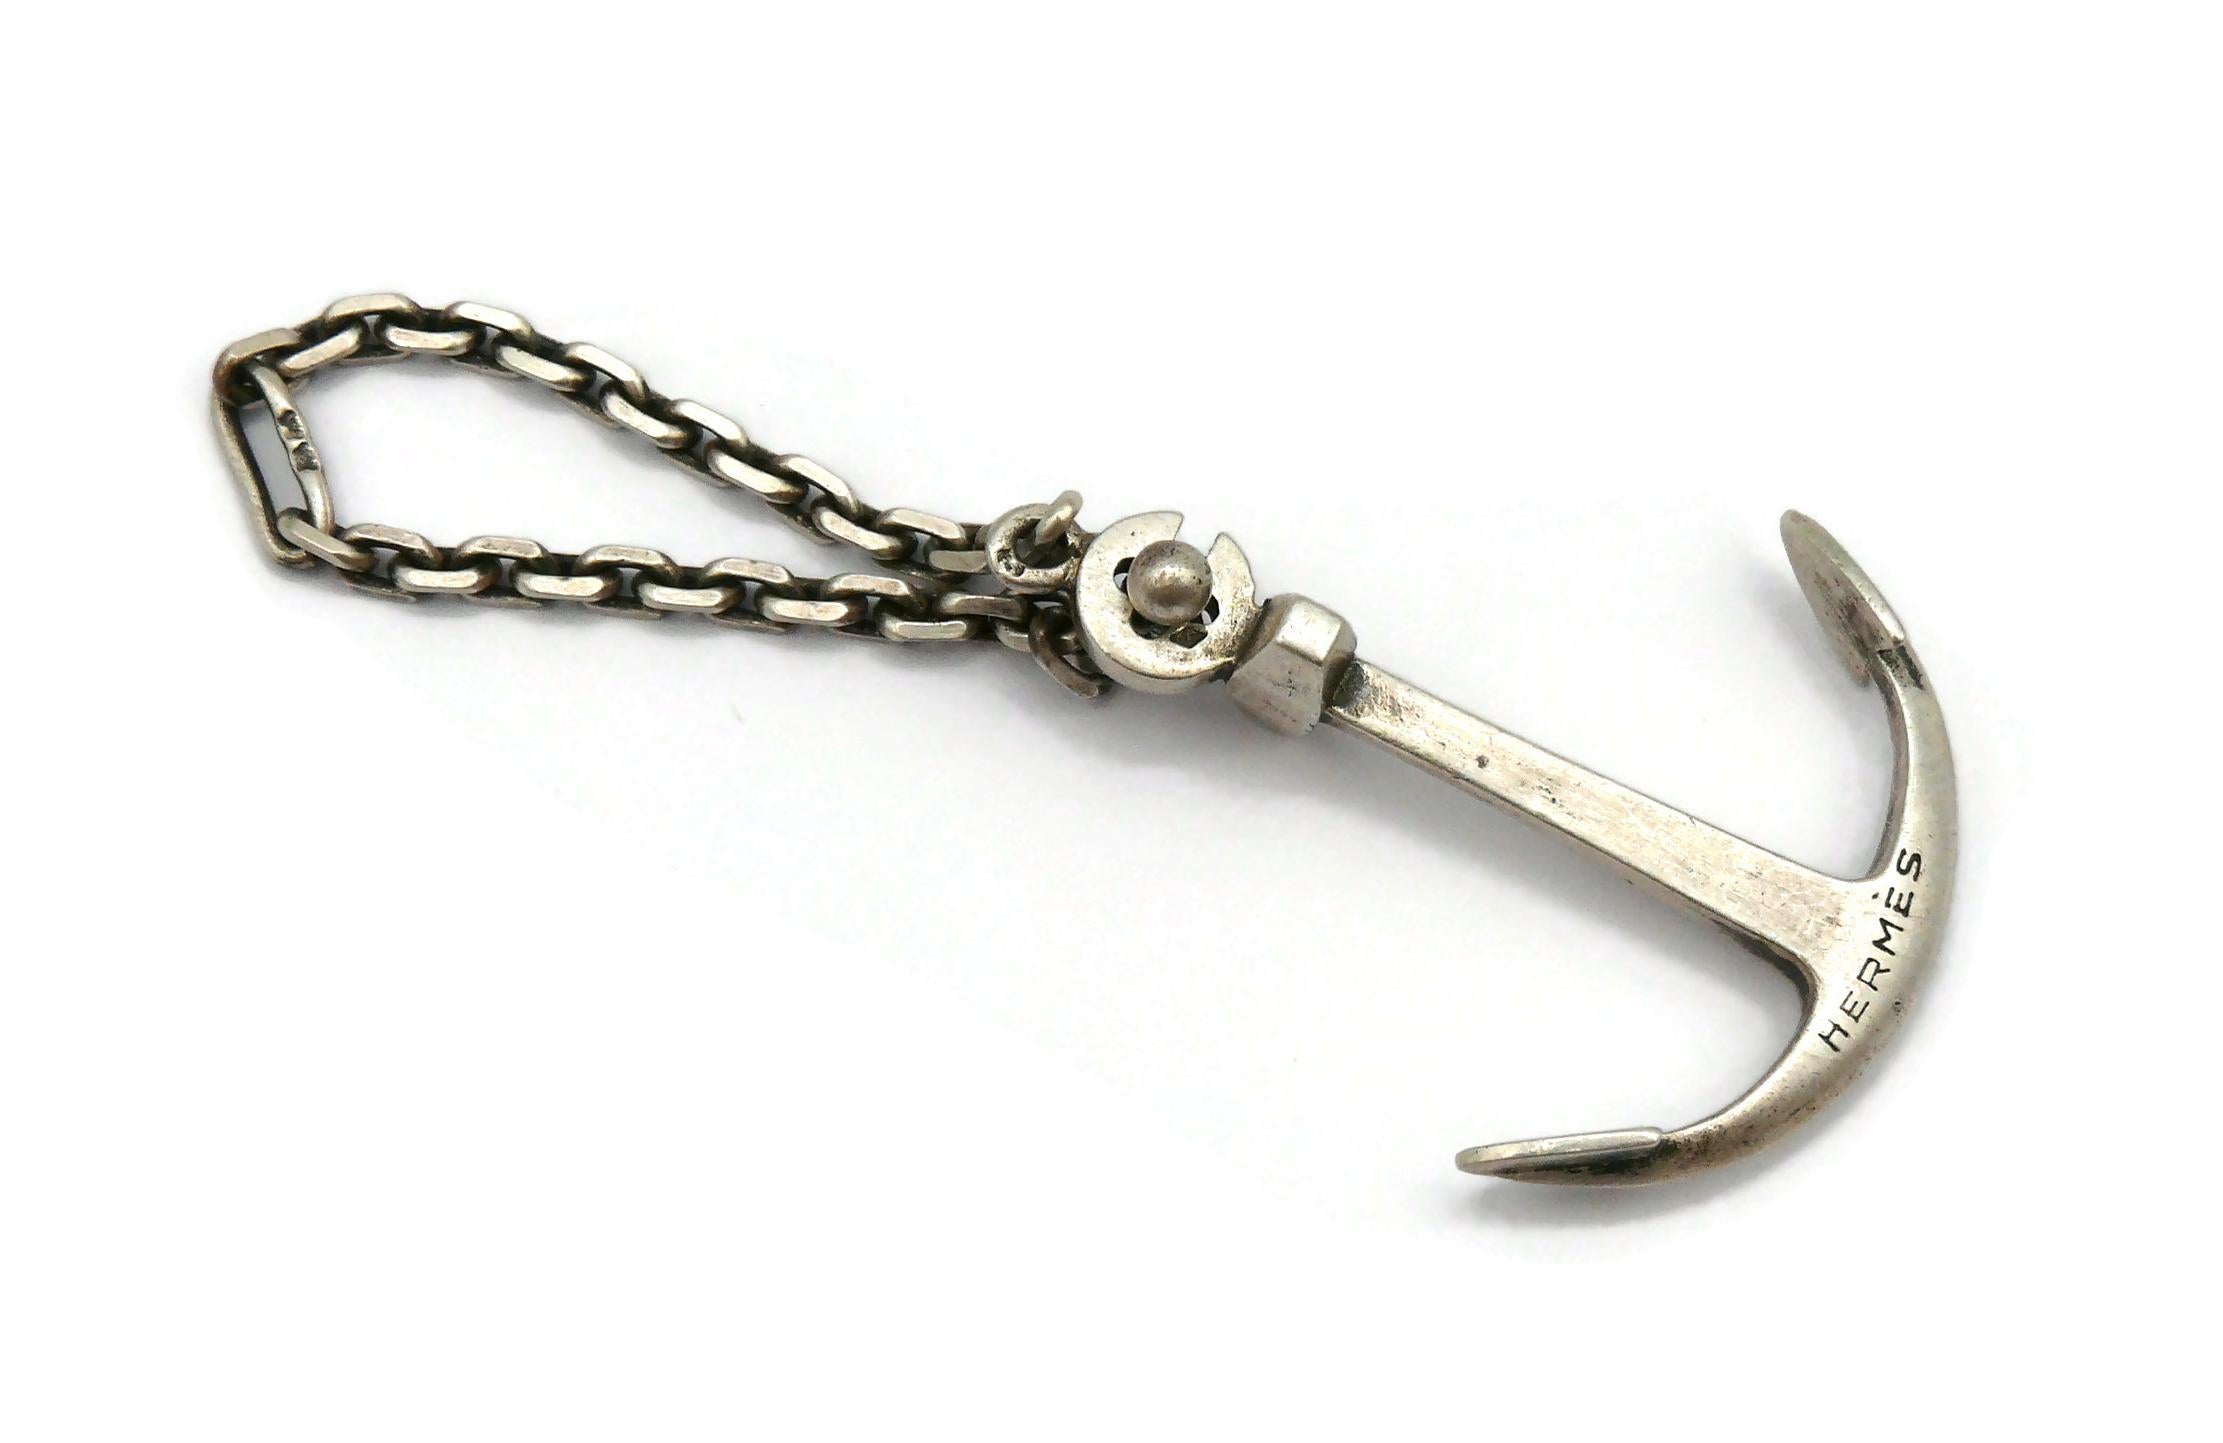 HERMES vintage silver boat anchor keychain.

Promotional item for Ancre Pils (first beer brewed at the Brasserie de l'Espérance, founded in 1746 in Strasbourg, France).

Embossed HERMES and ANCRE PILS.
French silver crab hallmarks.
Silmersmith